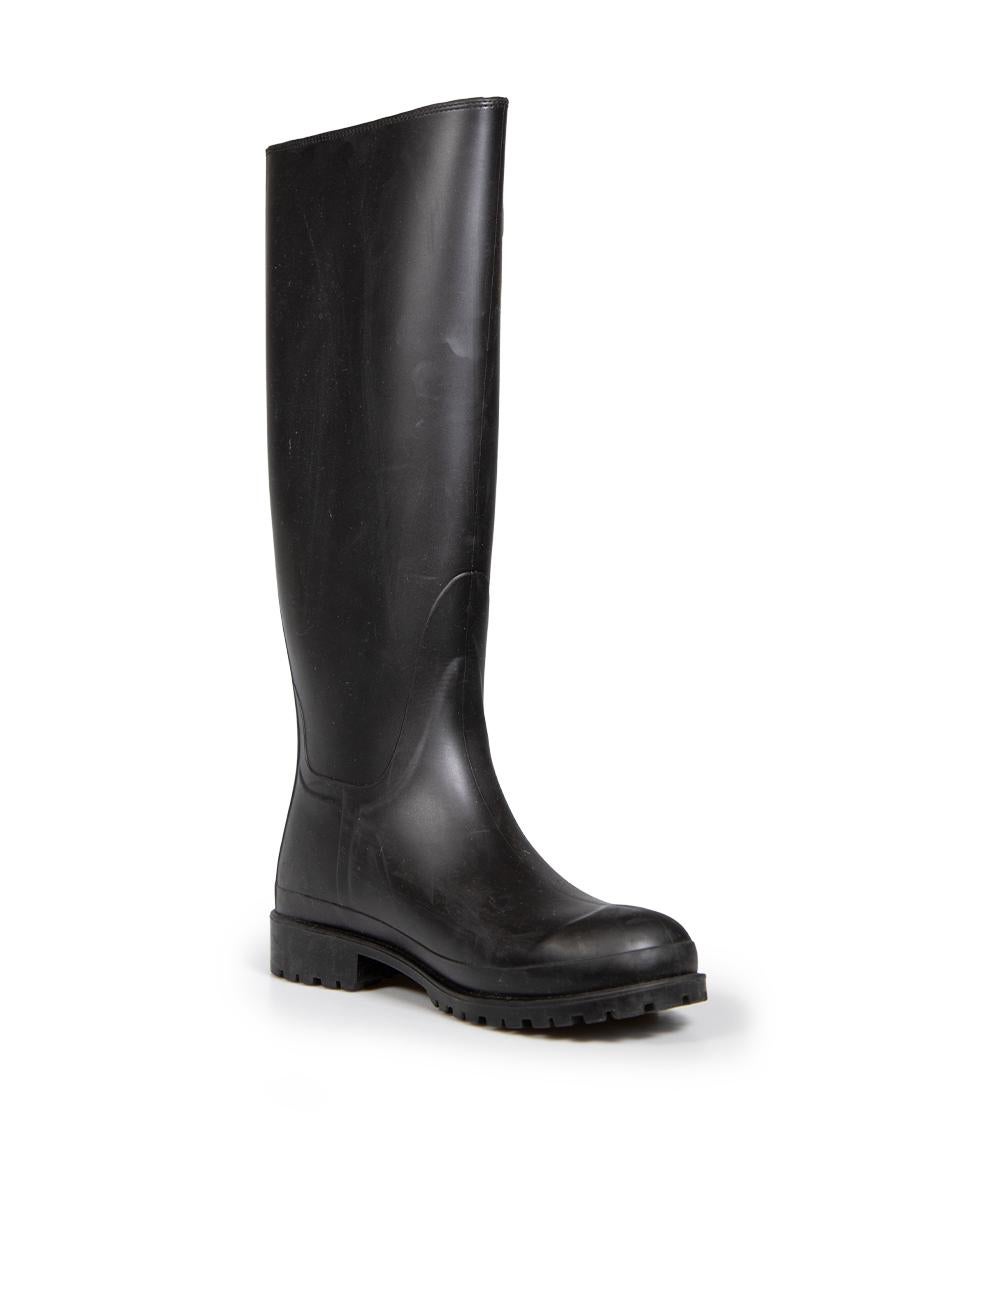 CONDITION is Very good. Minimal wear to boots is evident. Overall abrasions especially on the front, sides and upper area of both shoes on this used Saint Laurent designer resale item.
 
 
 
 Details
 
 
 Black
 
 Rubber
 
 Wellington boots
 
 Knee